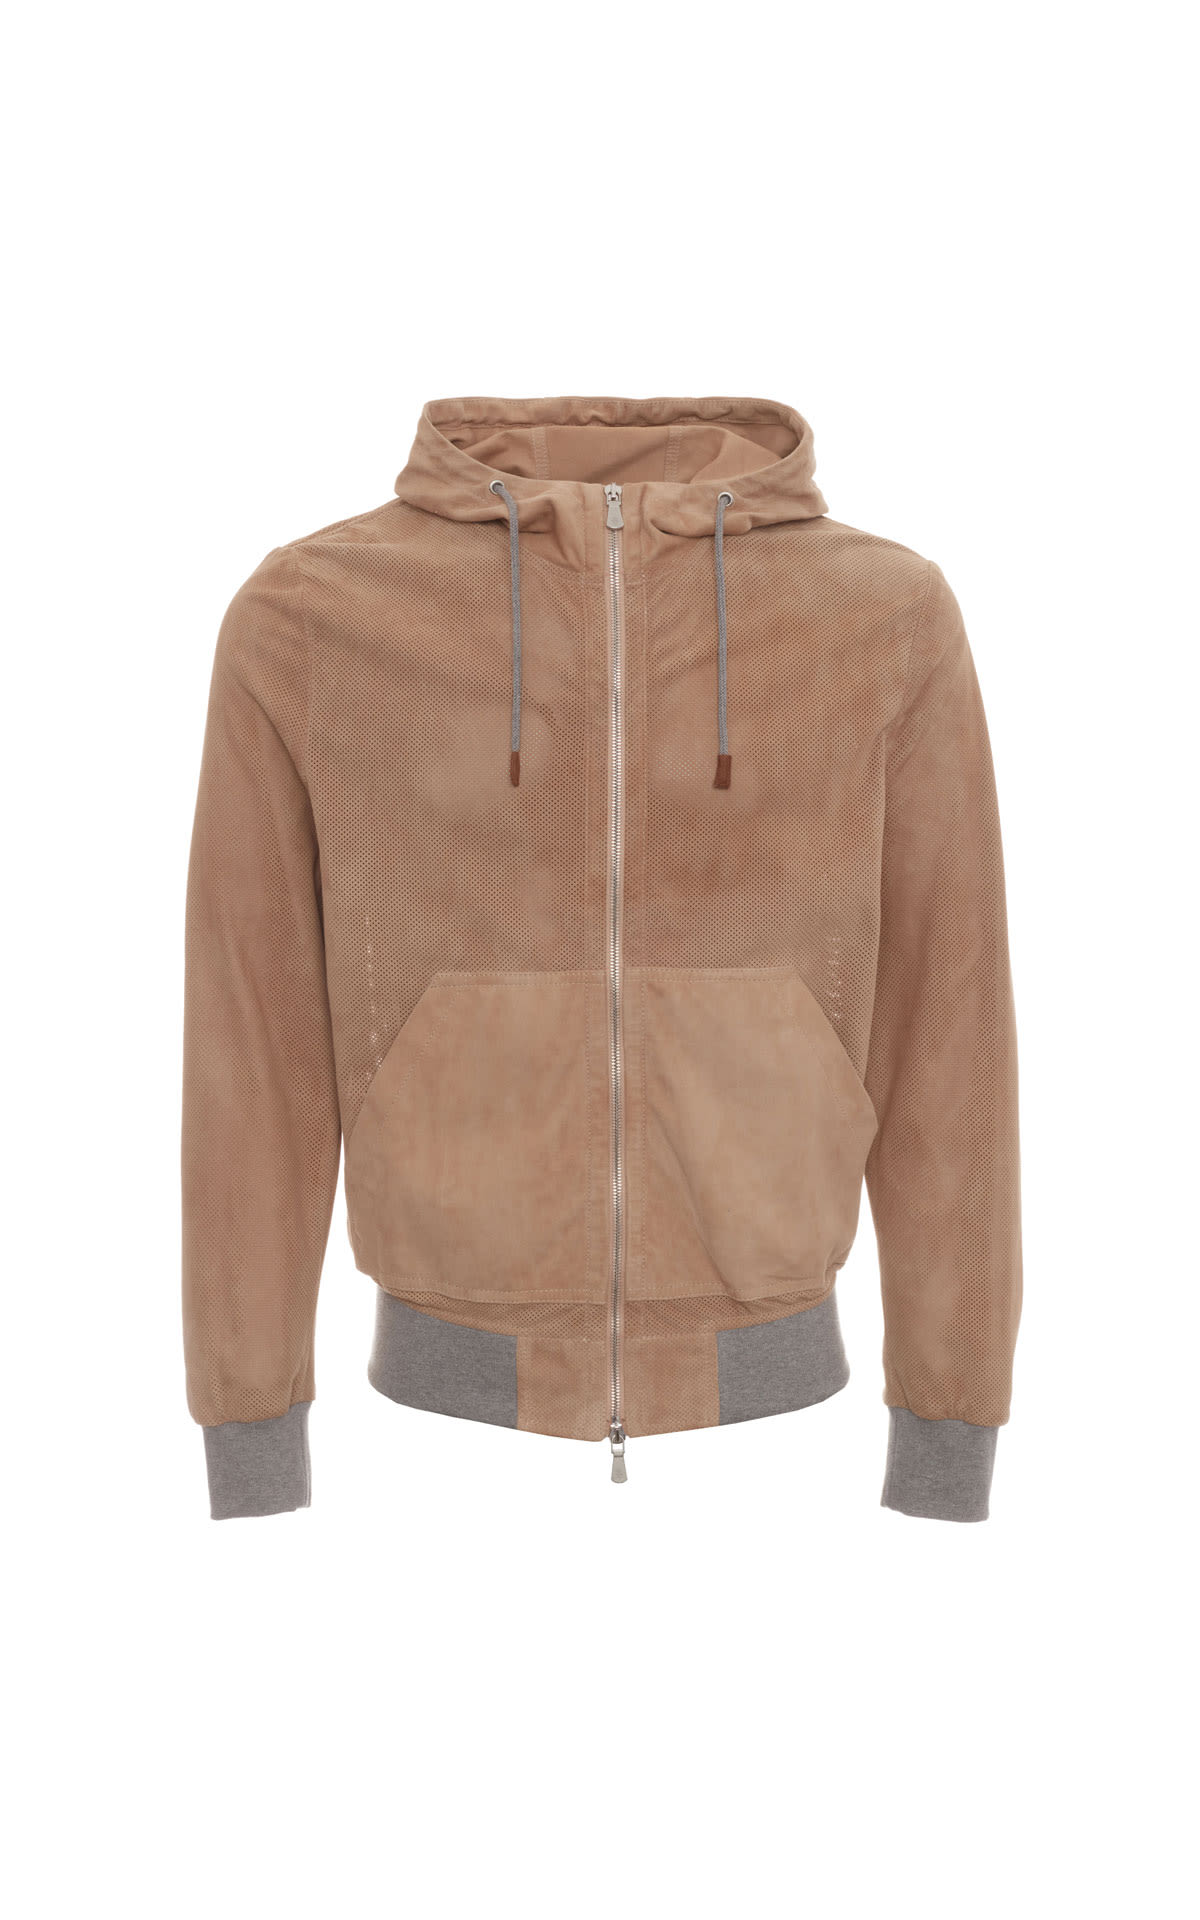 Eleventy Perforated suede hooded jacket from Bicester Village